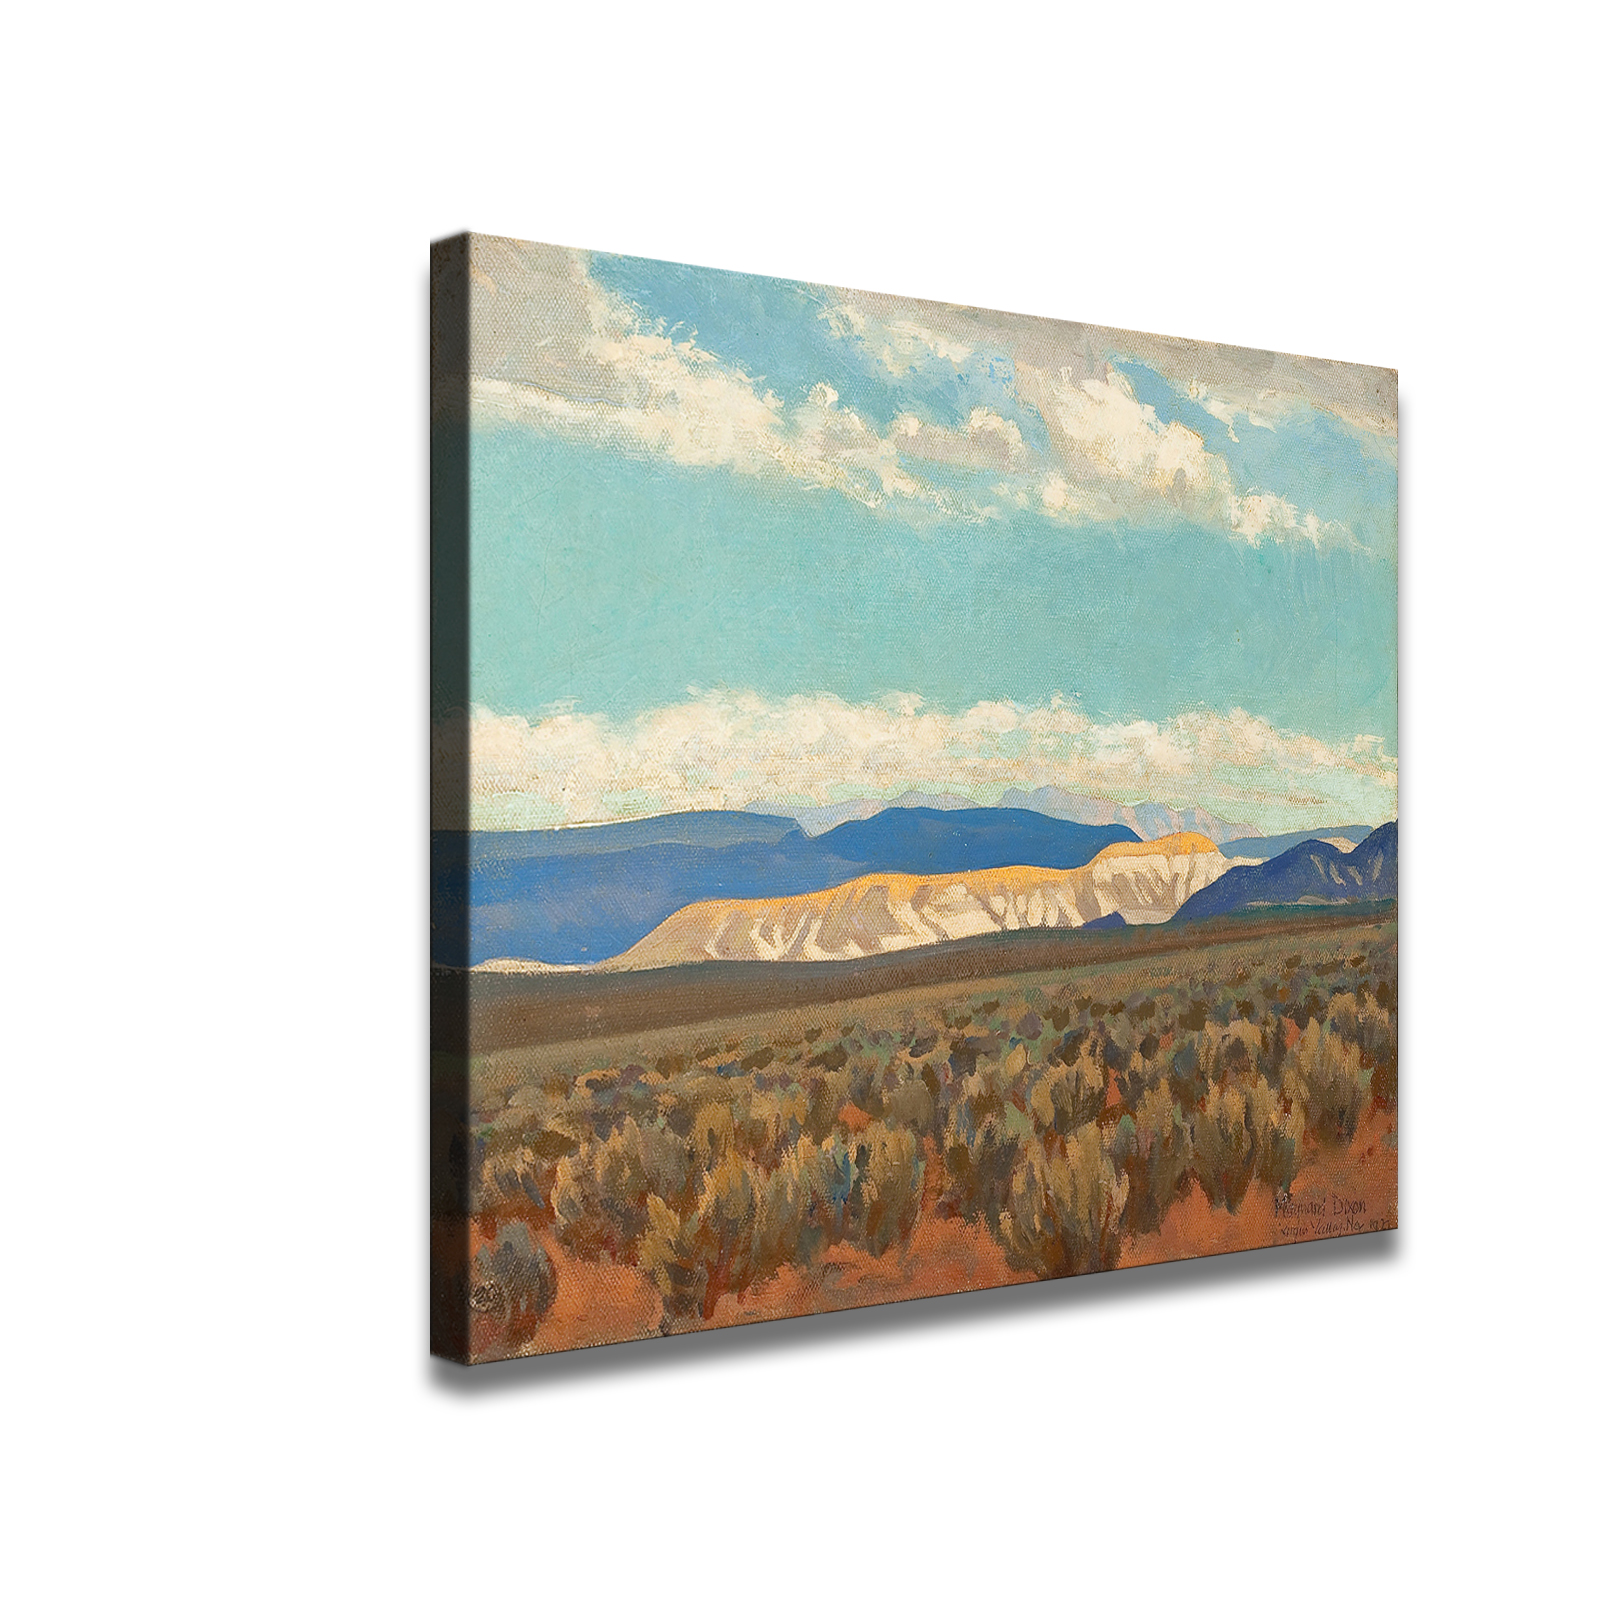 MAYNARD DIXON (American, 1875-1946). Calico Hills (Virgin Valley, Nevada; No.350) HD Canvas Print Home Decor Paintings Wall Art Pictures